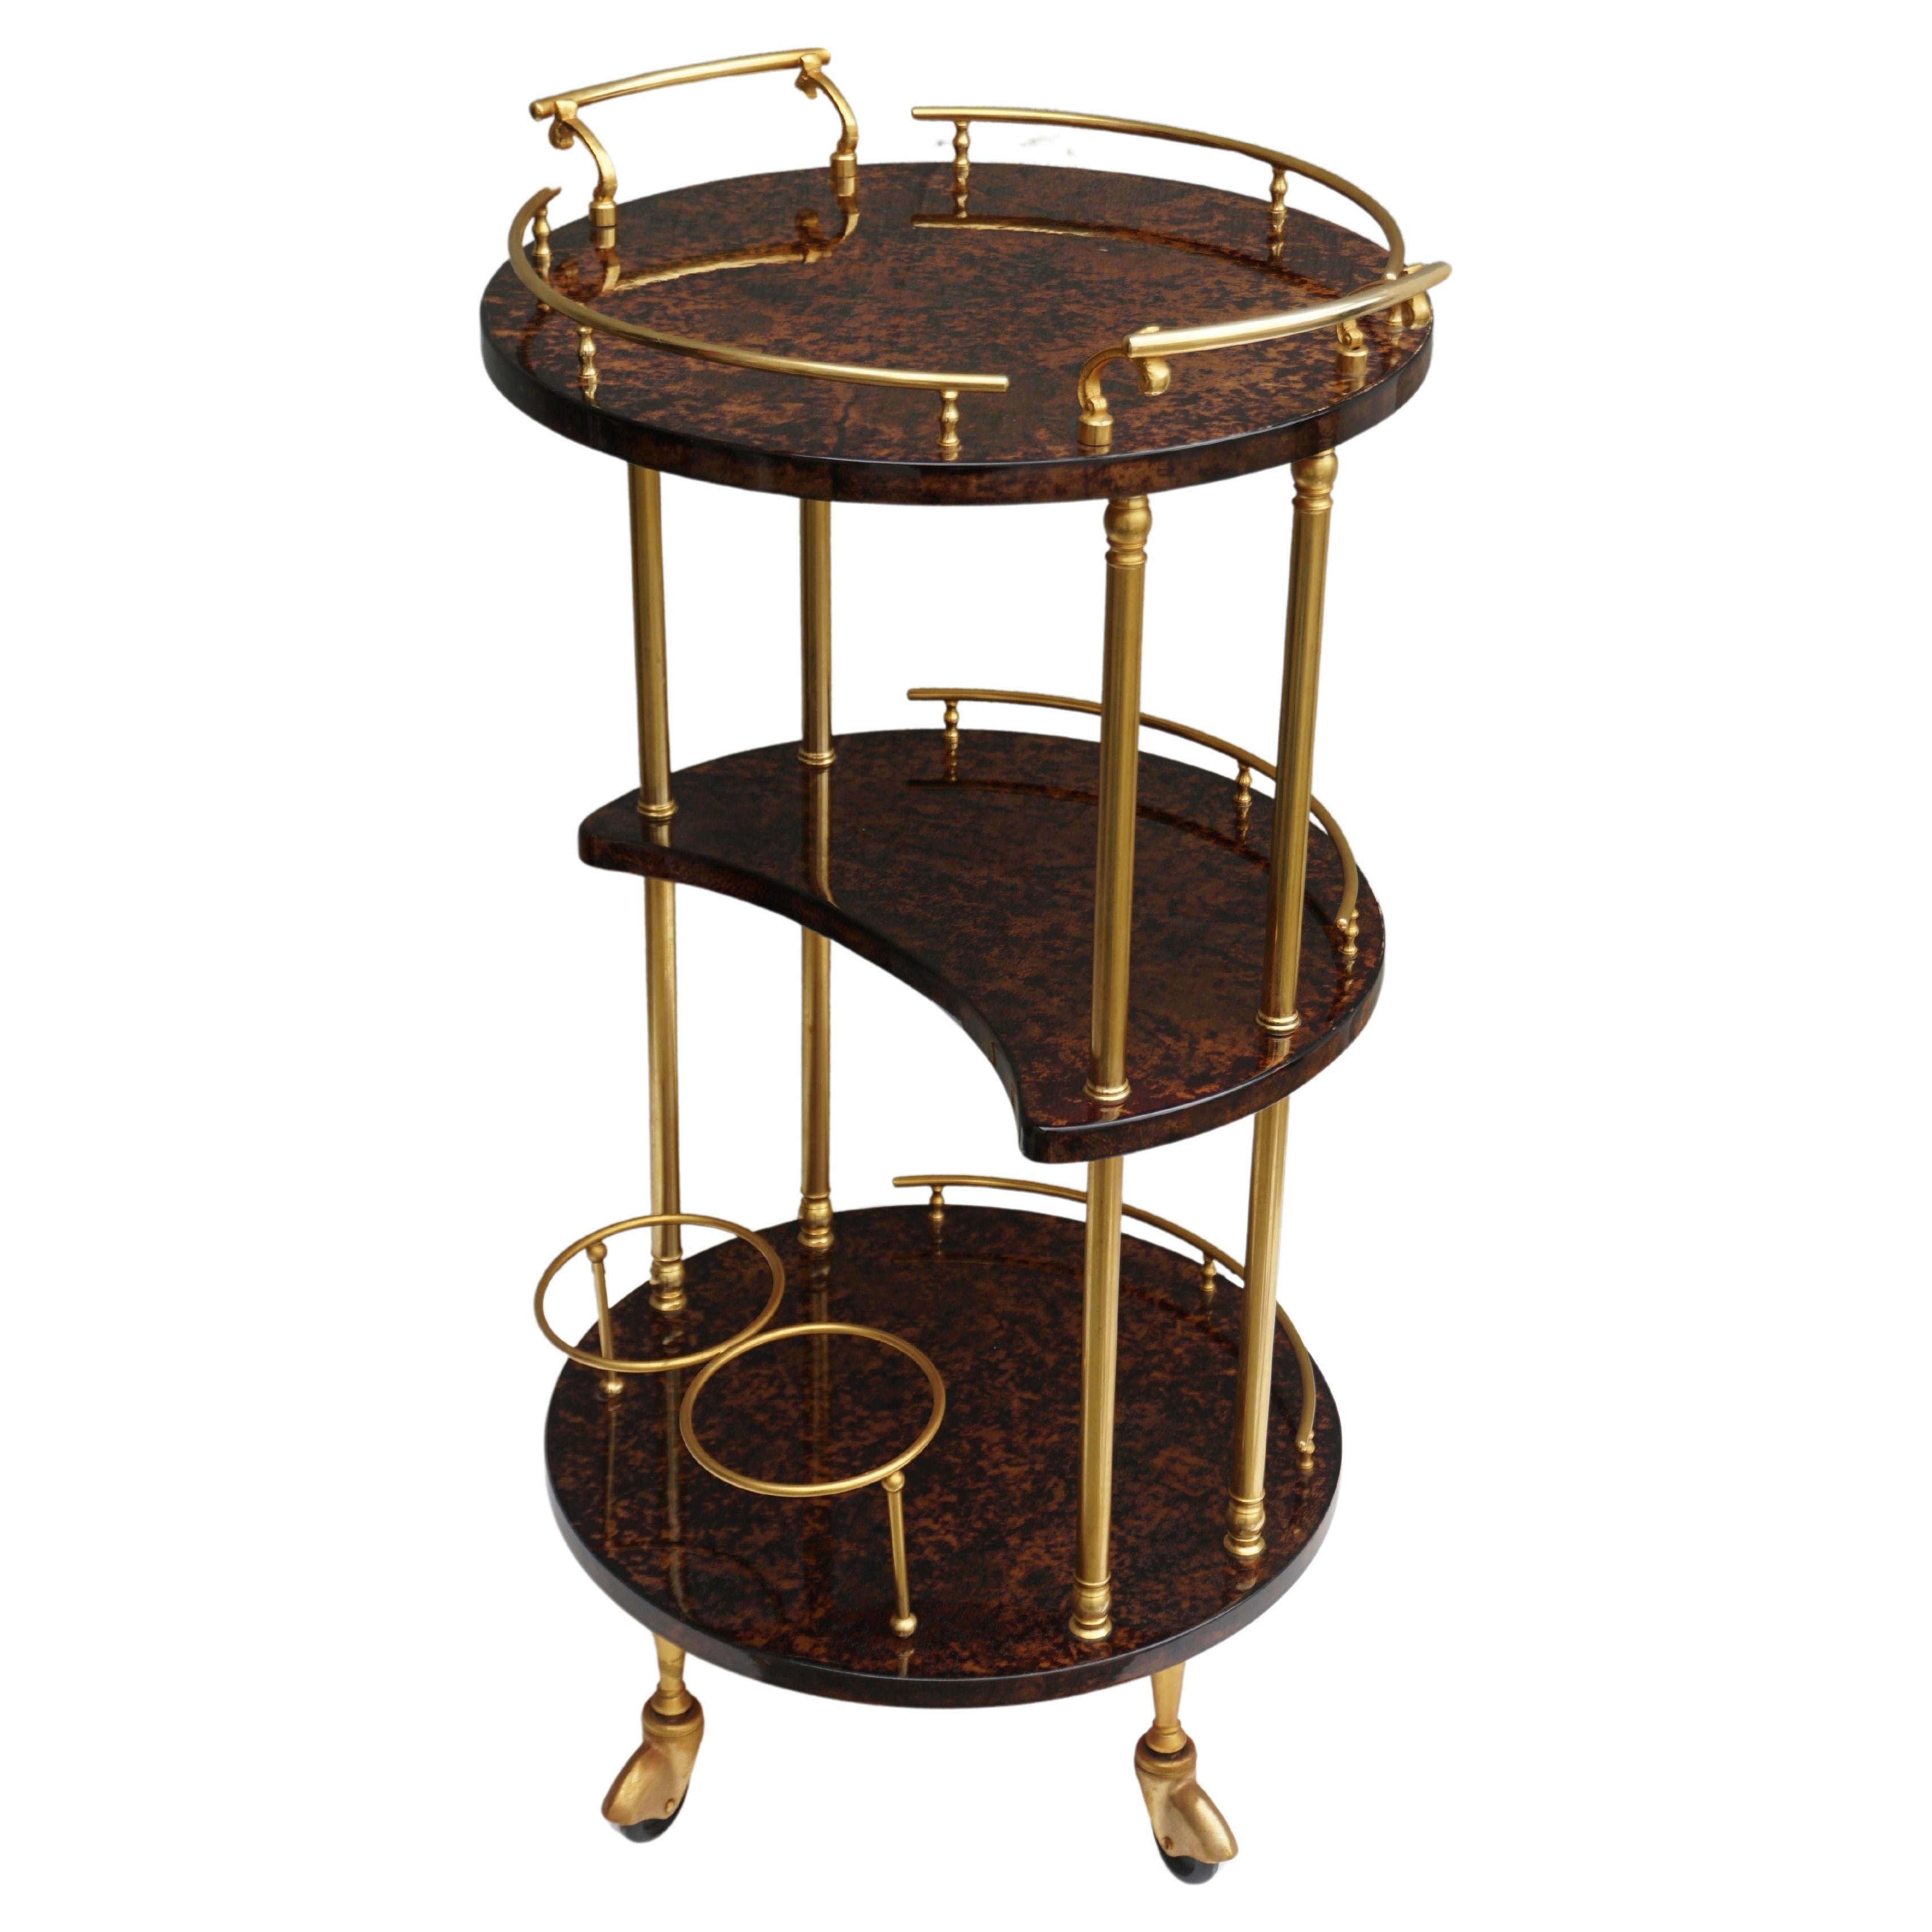 Aldo Tura bar cart lacquered in goatskin with golden brass applications. The wooden frame is covered with brown colored goatskin, varnished in clear acrylic. Along with artists like Piero Fornasetti and Carlo Bugatti, Aldo Tura (1909-1963)